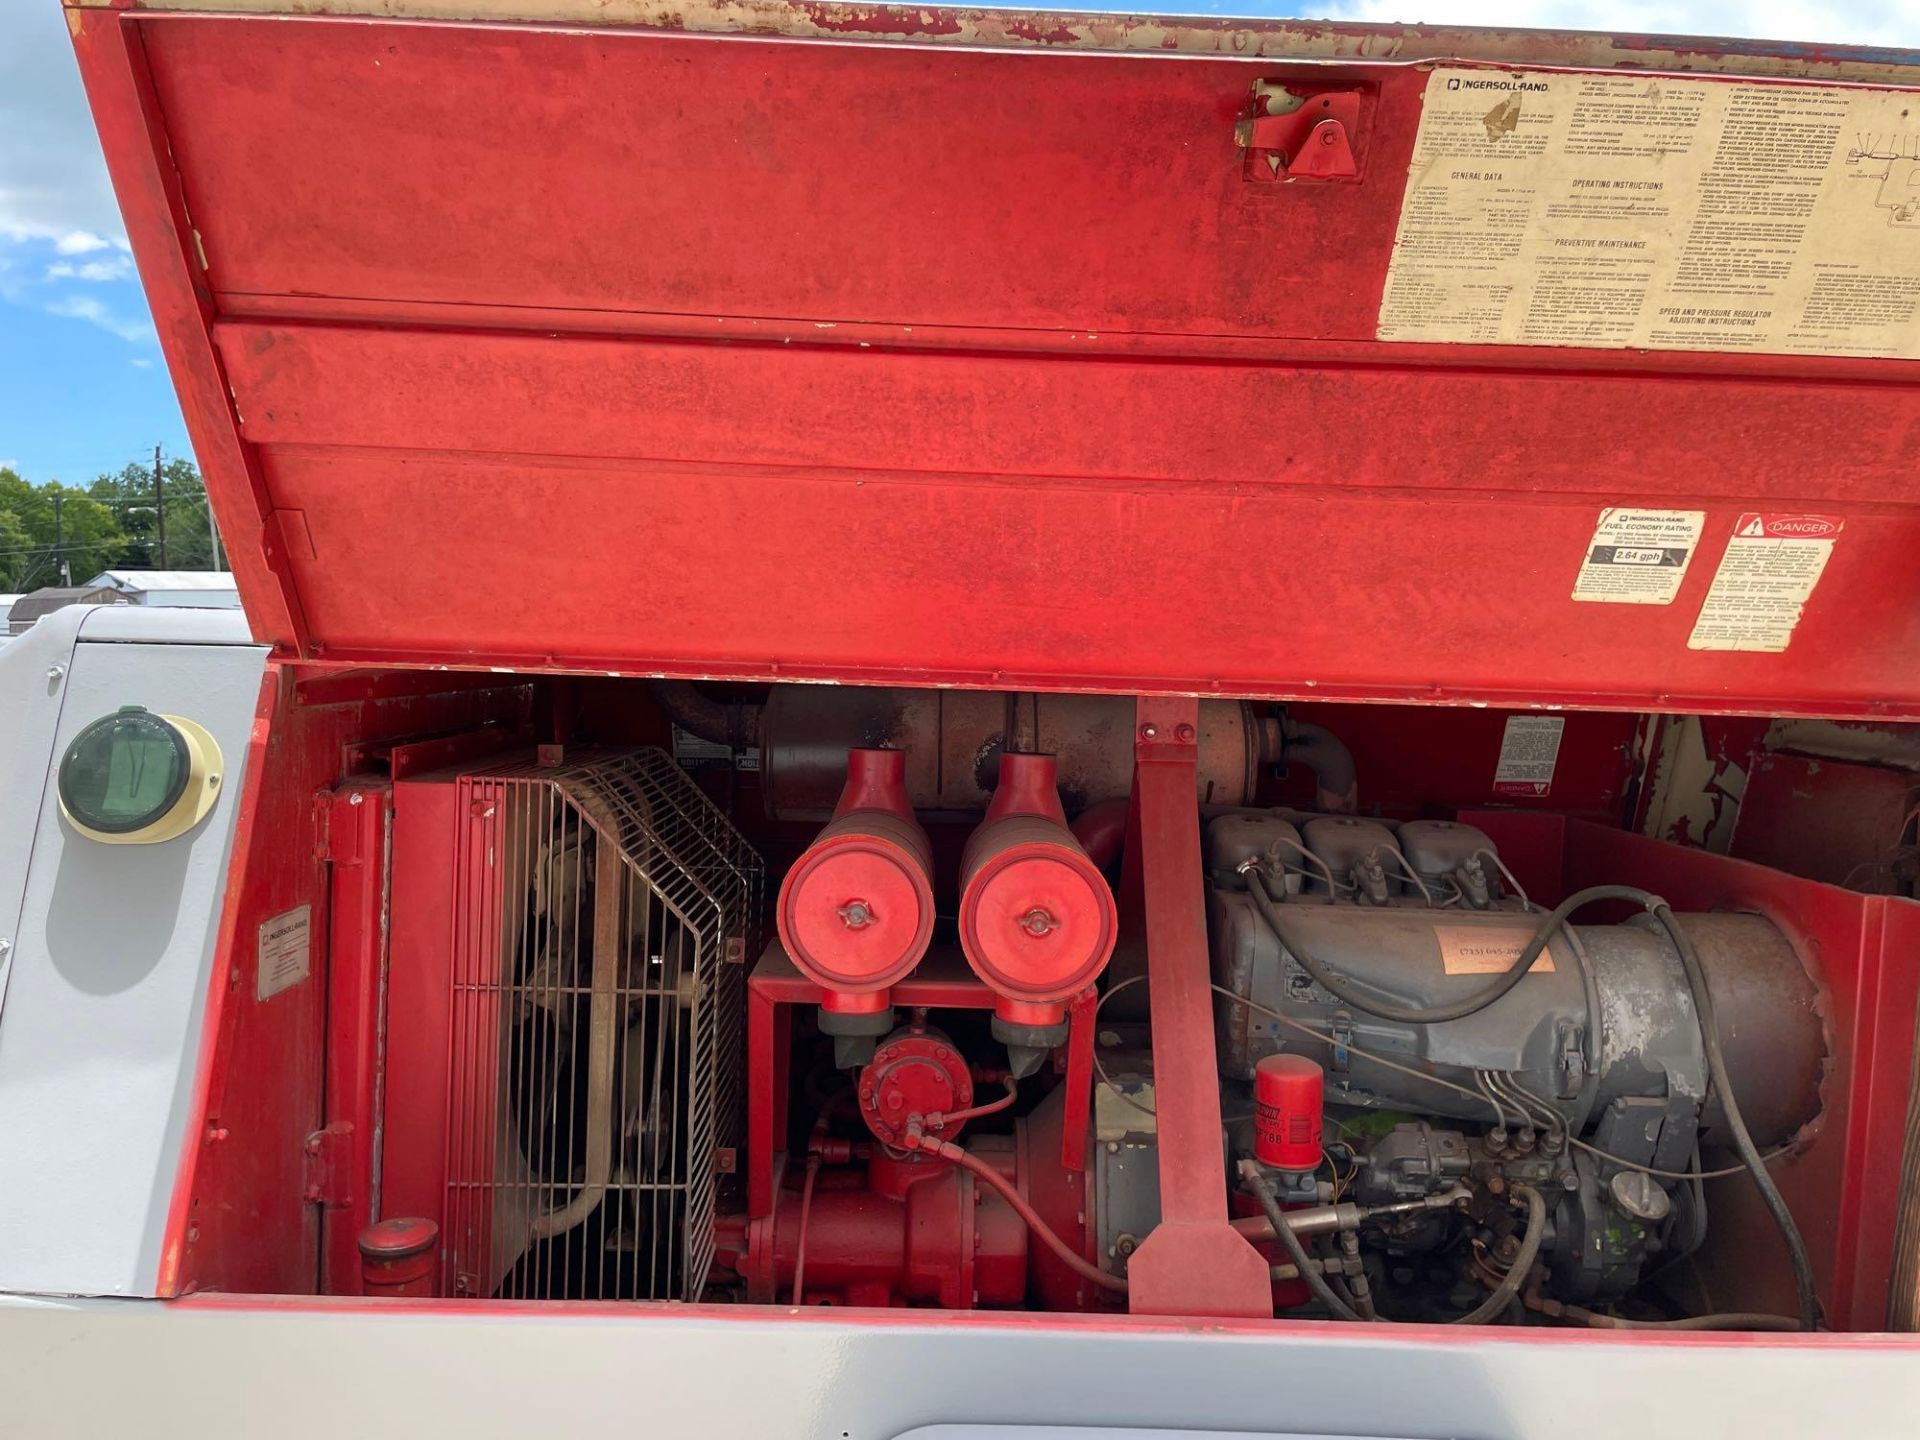 Ingersoll Rand Portable Air Compressor with Diesel Engine - Image 12 of 17